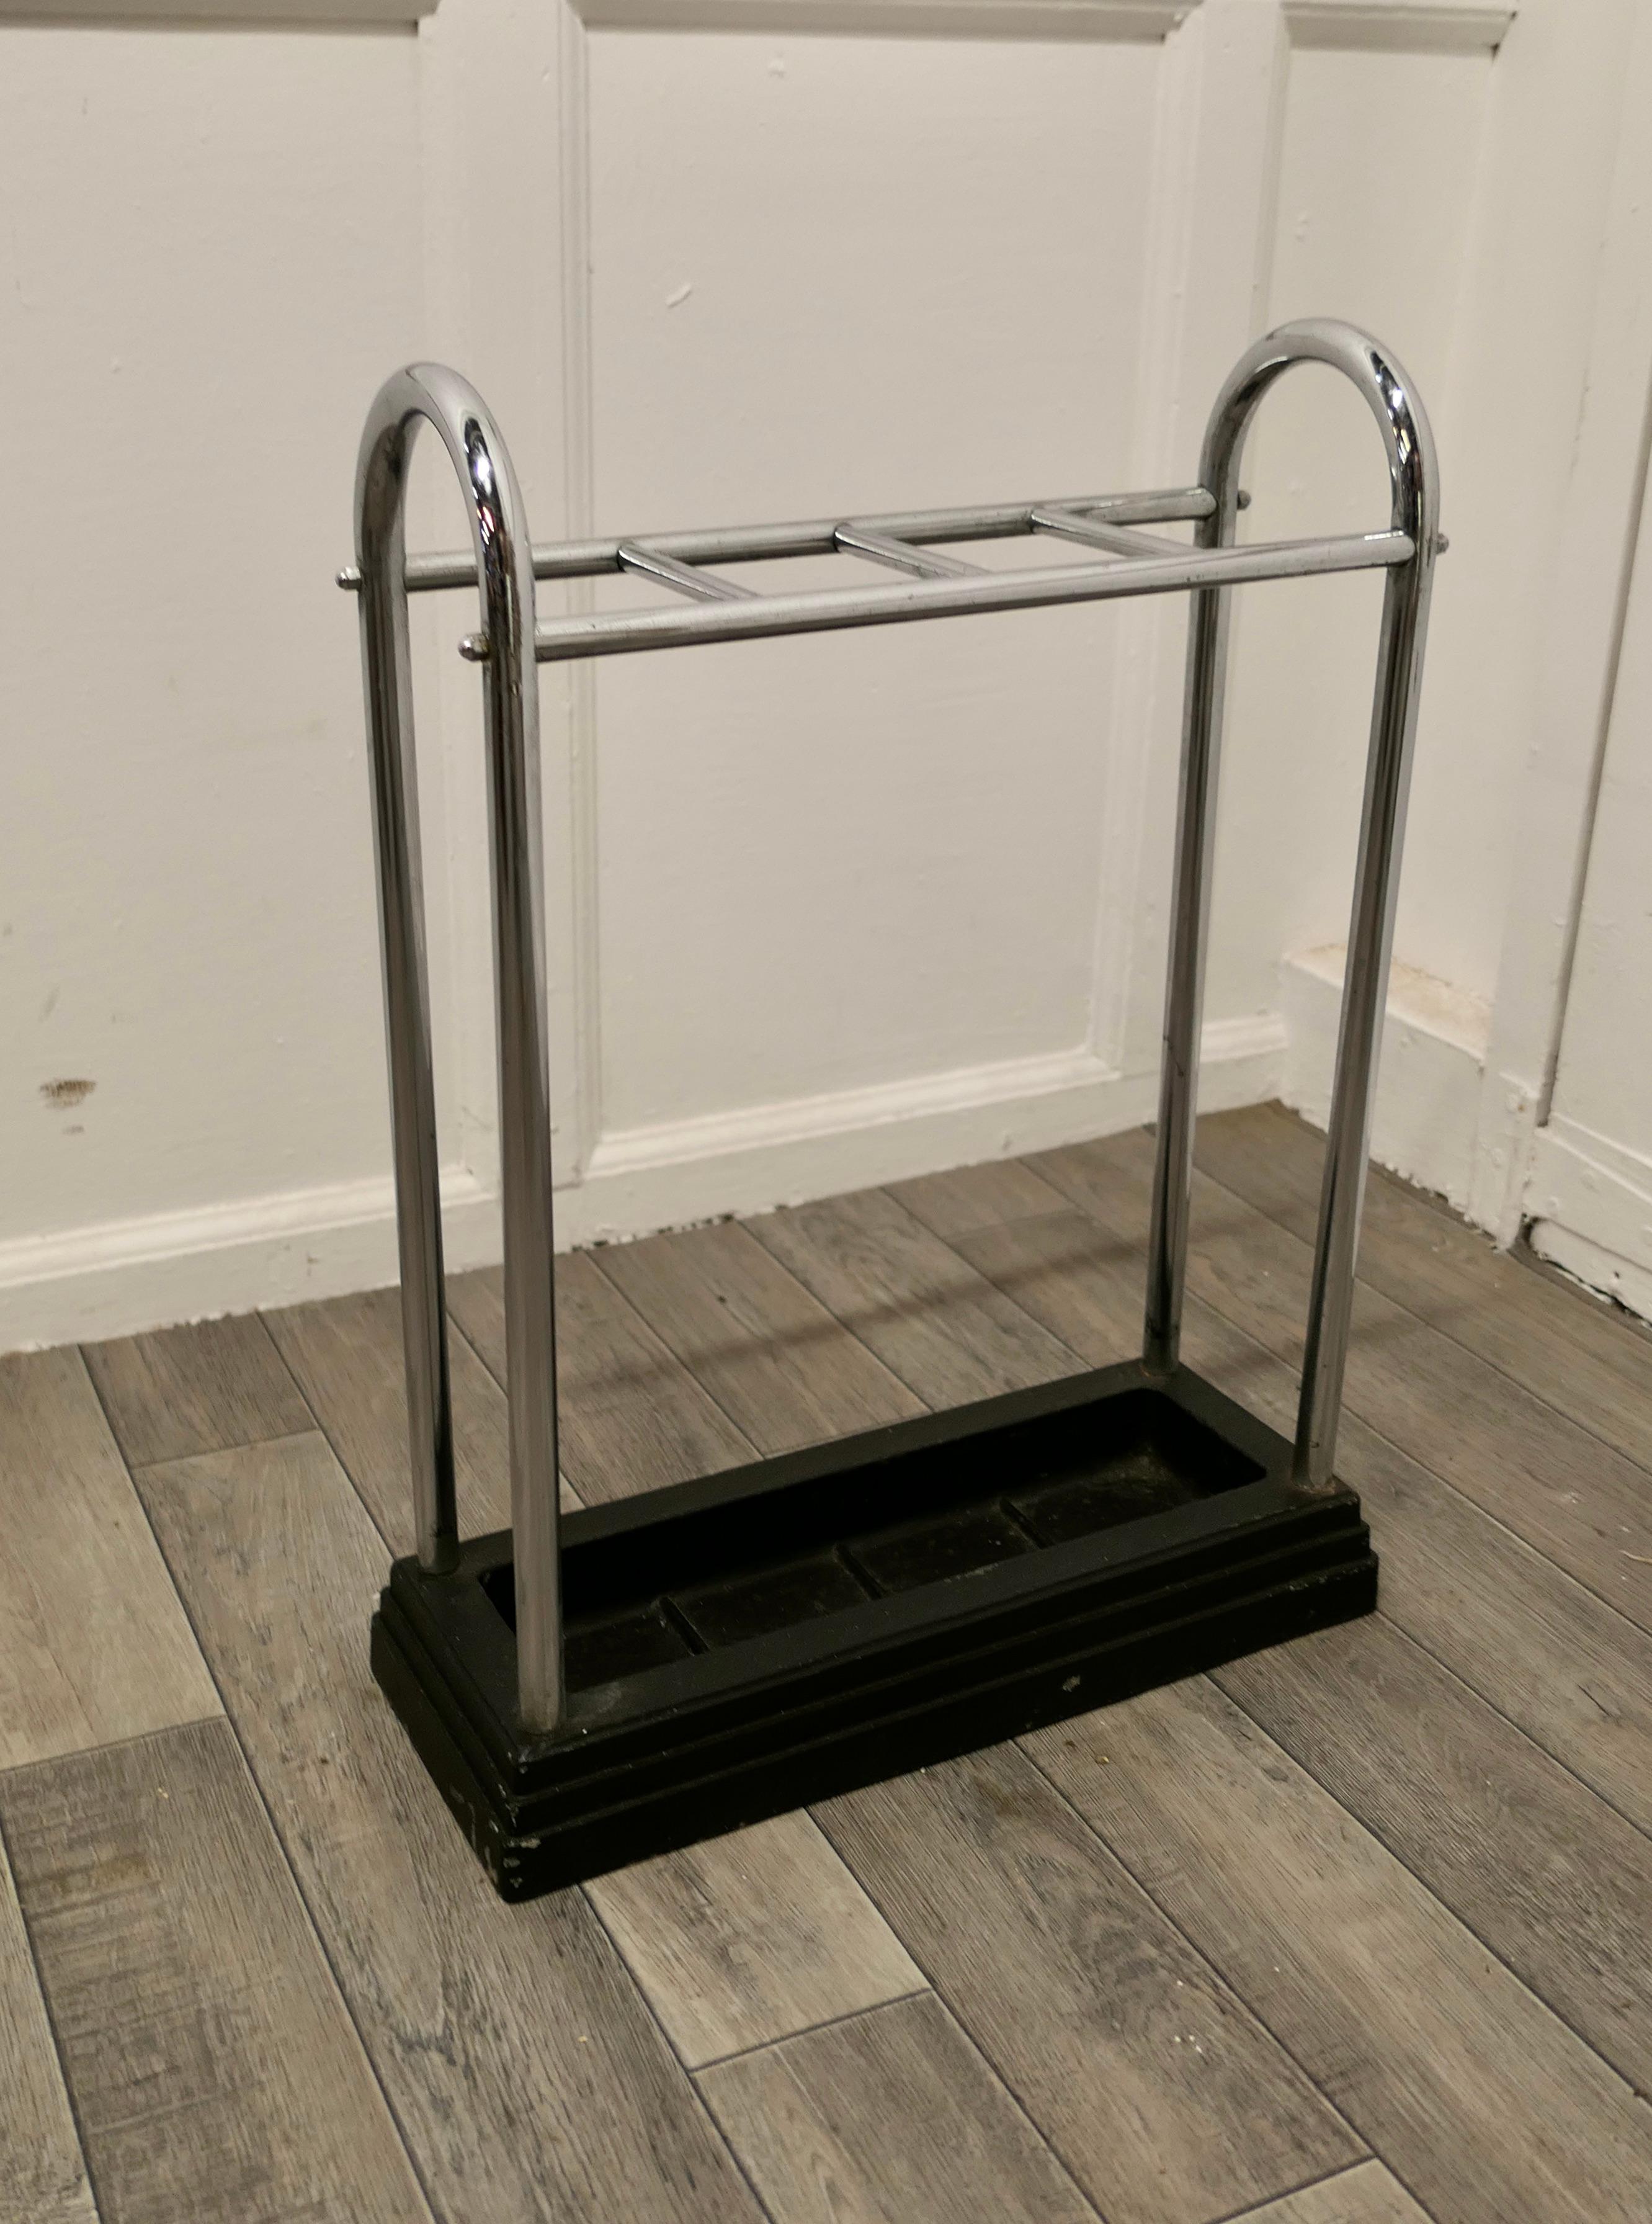 An Art Deco chrome and cast iron stick stand or umbrella stand

A charming piece made in Chrome, the top is divided into 4 sections to hold either Walking Sticks or Umbrellas, 
The heavy iron base of the stand is stepped in the Odeon style 
The